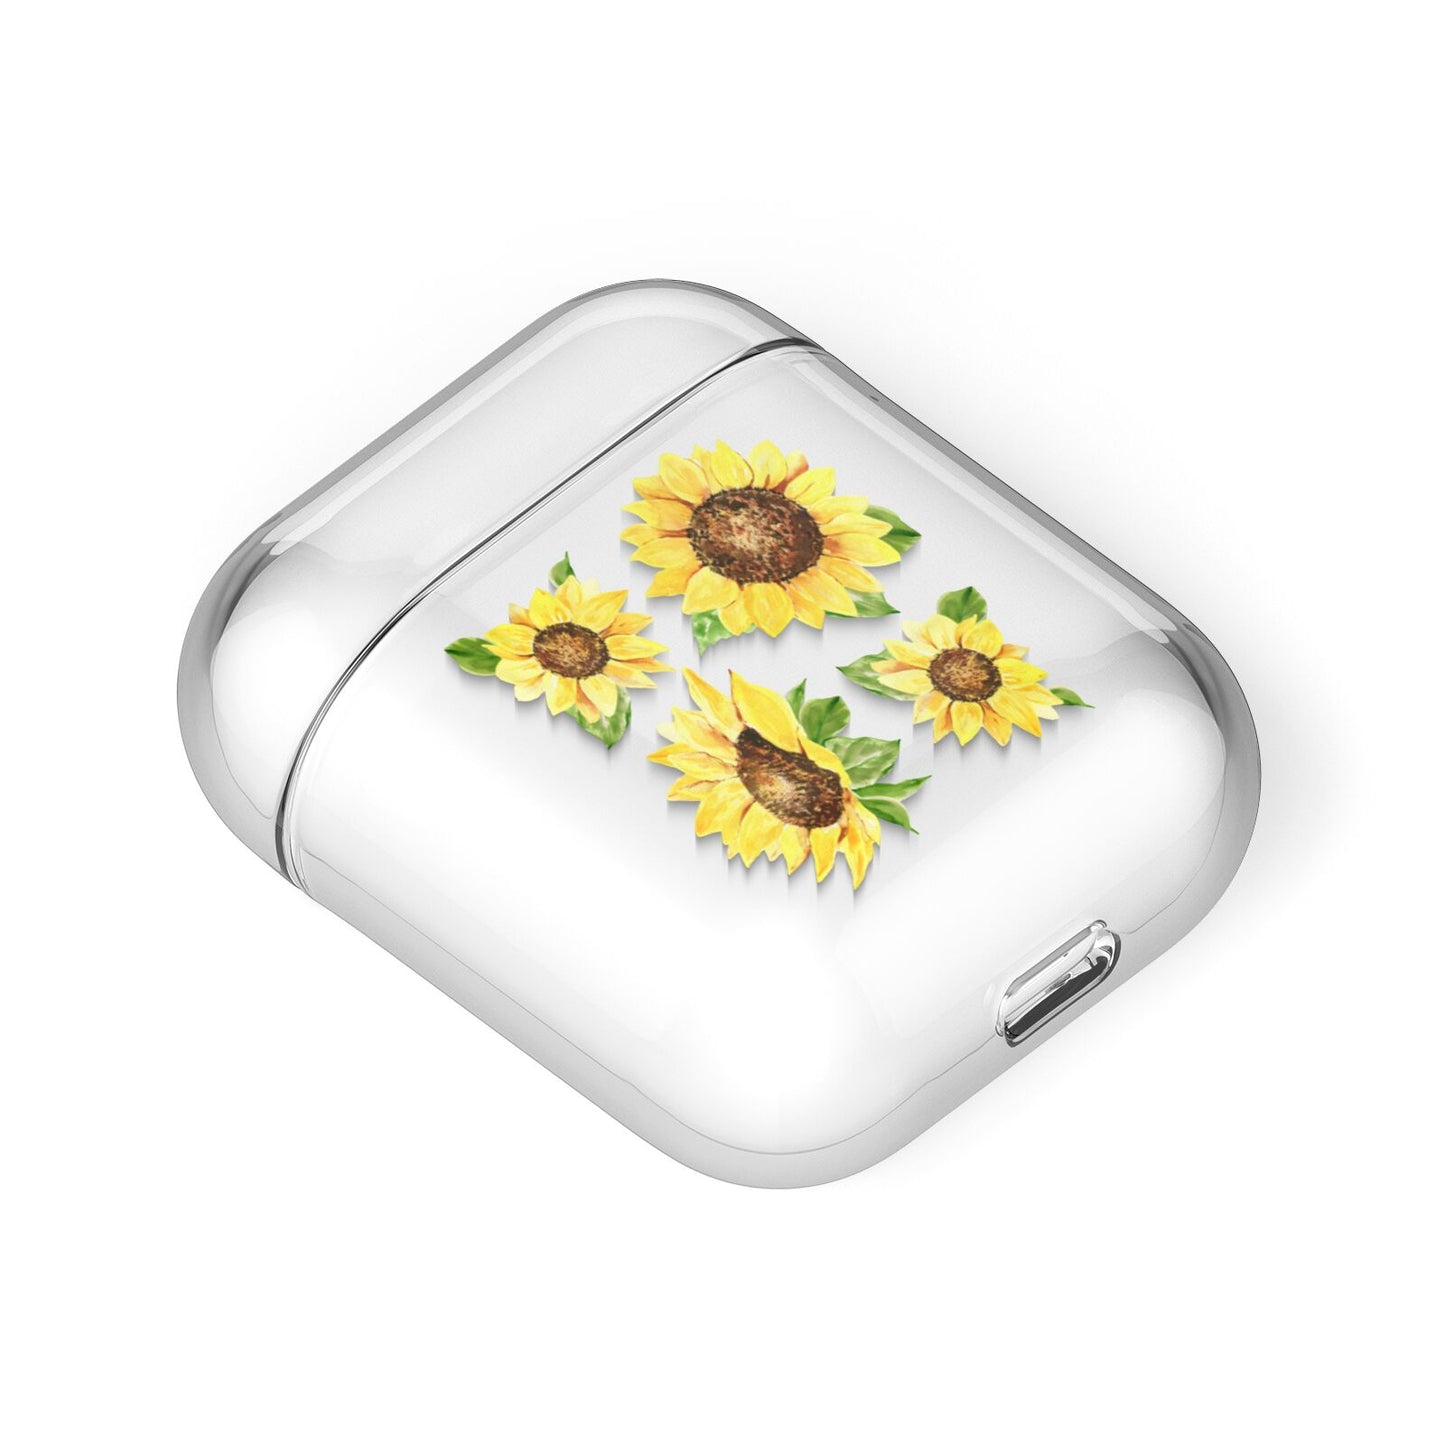 Sunflowers AirPods Case Laid Flat